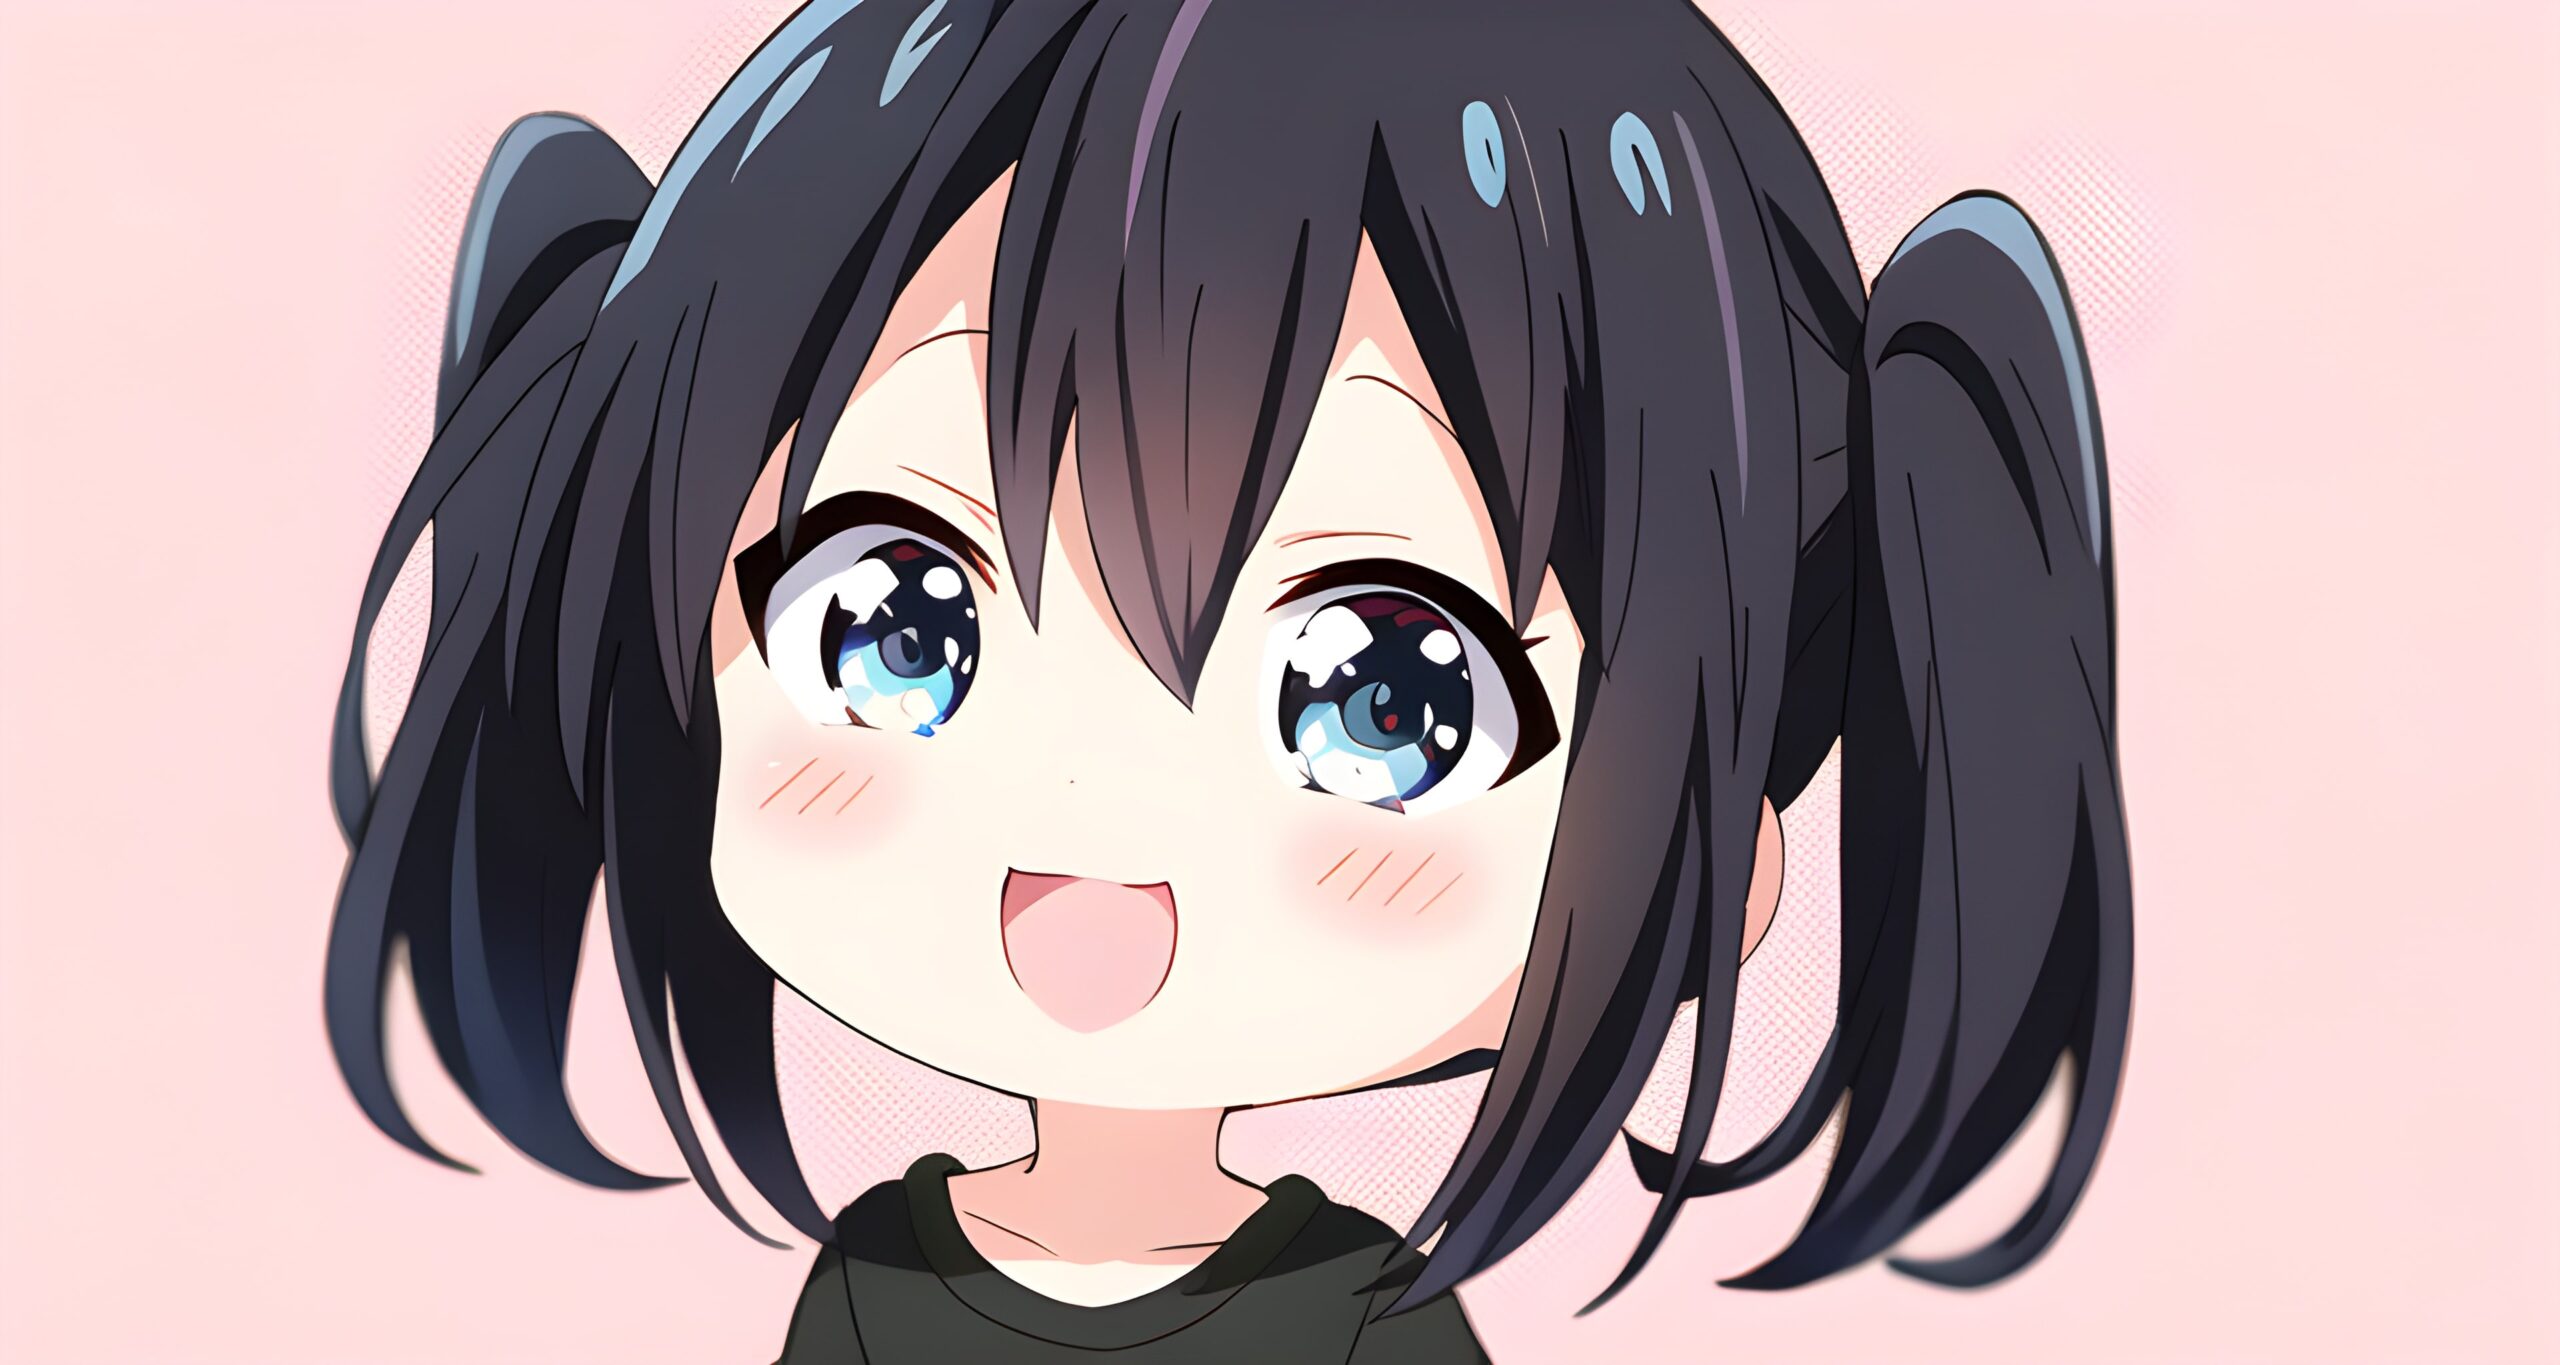 Happy chibi girl with pigtails